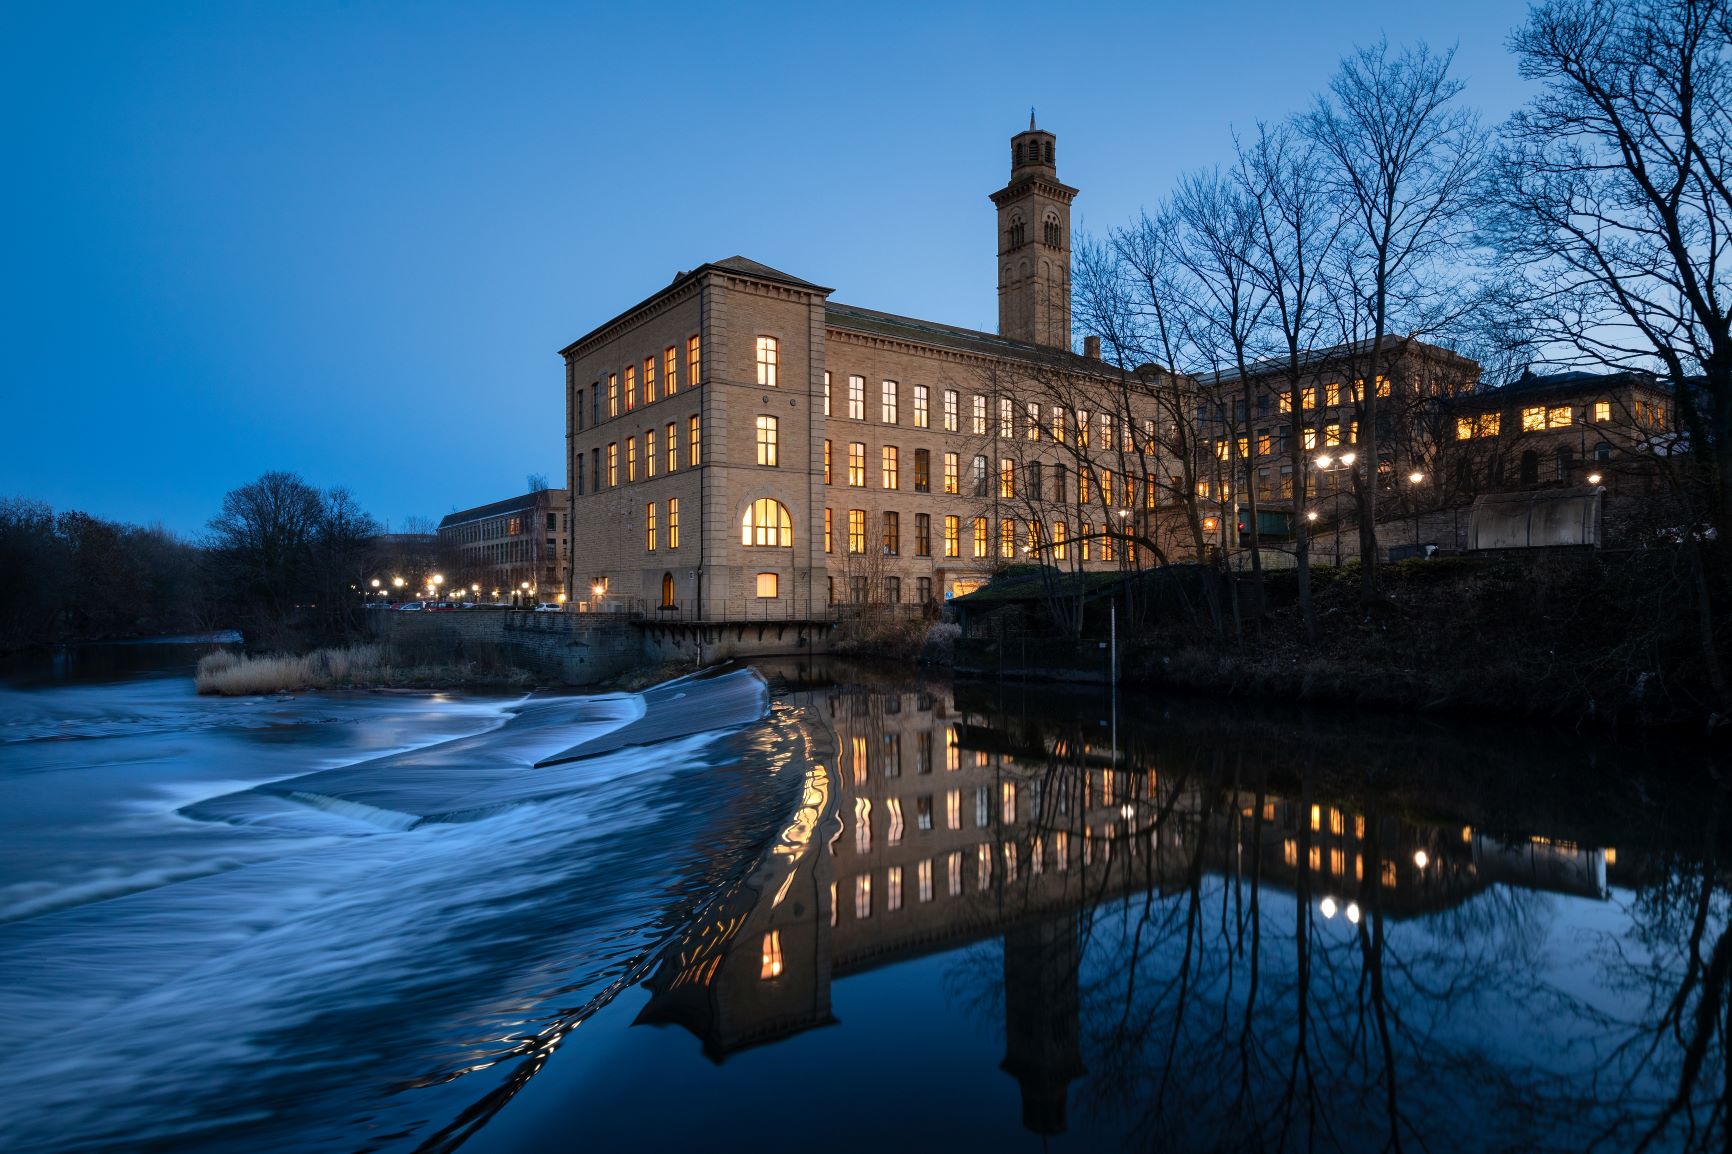 Saltaire New Mill weir at night